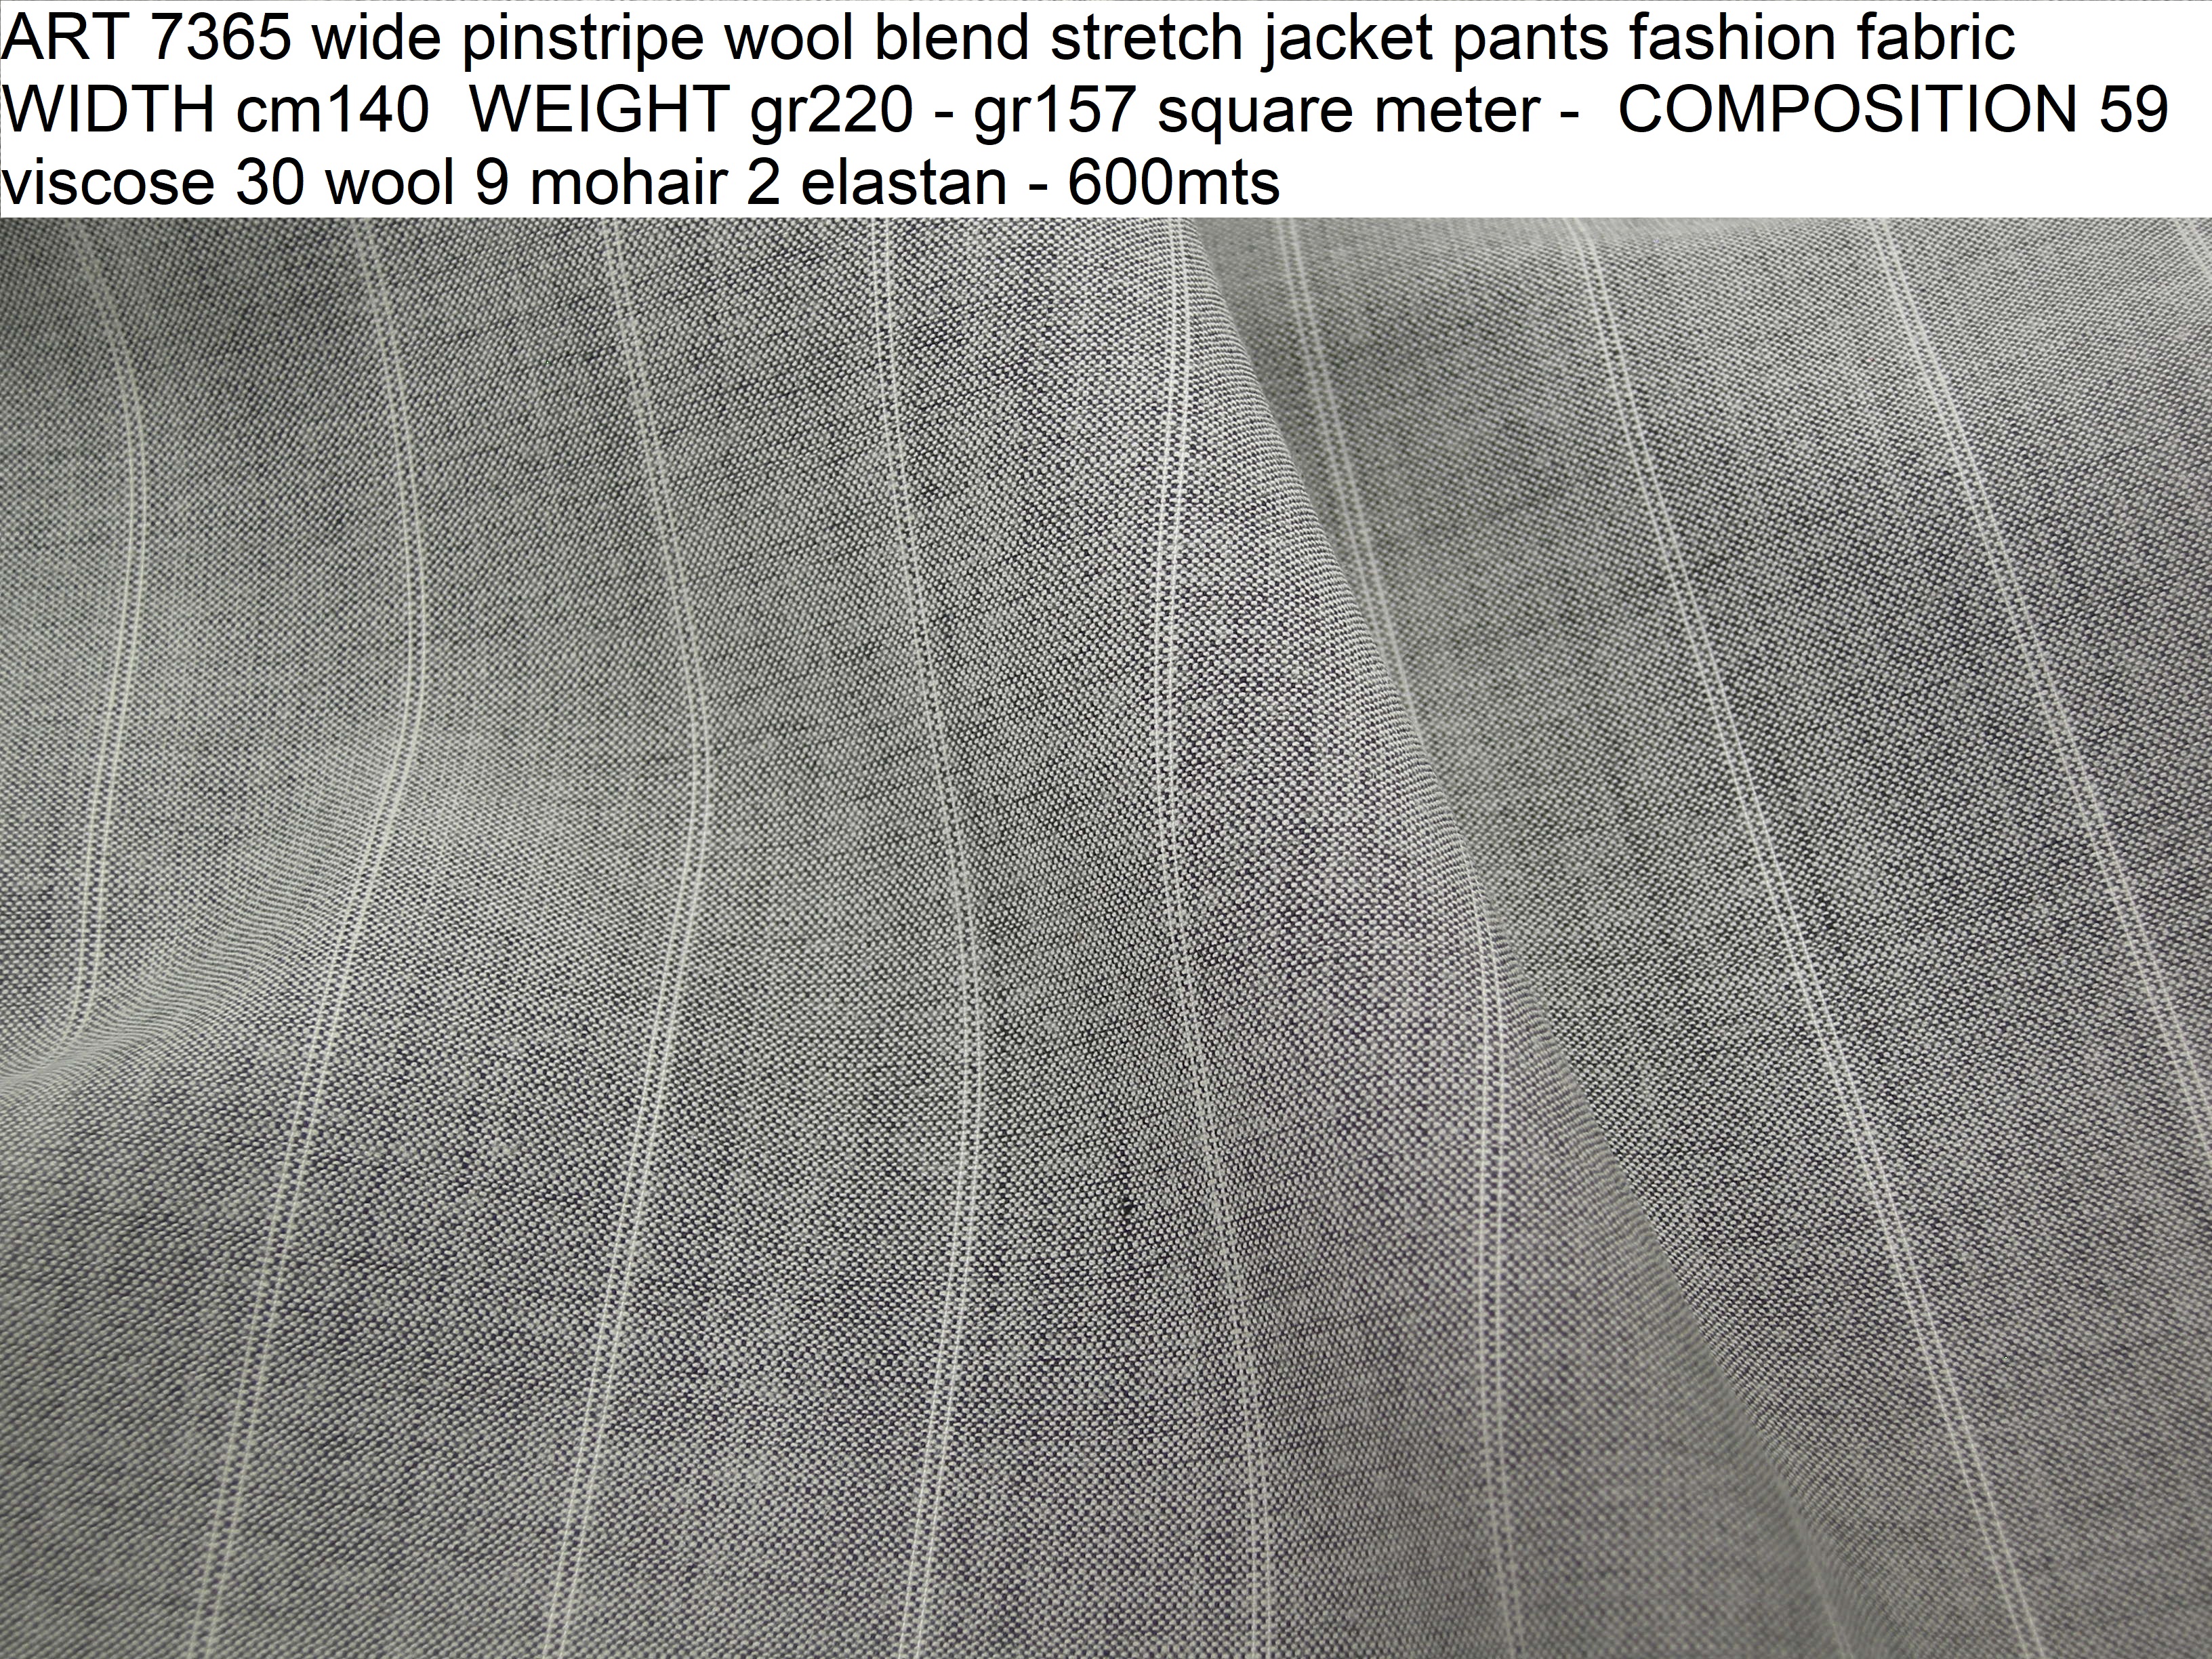 ART 7365 wide pinstripe wool blend stretch jacket pants fashion fabric WIDTH cm140 WEIGHT gr220 - gr157 square meter - COMPOSITION 59 viscose 30 wool 9 mohair 2 elastan - 600mts